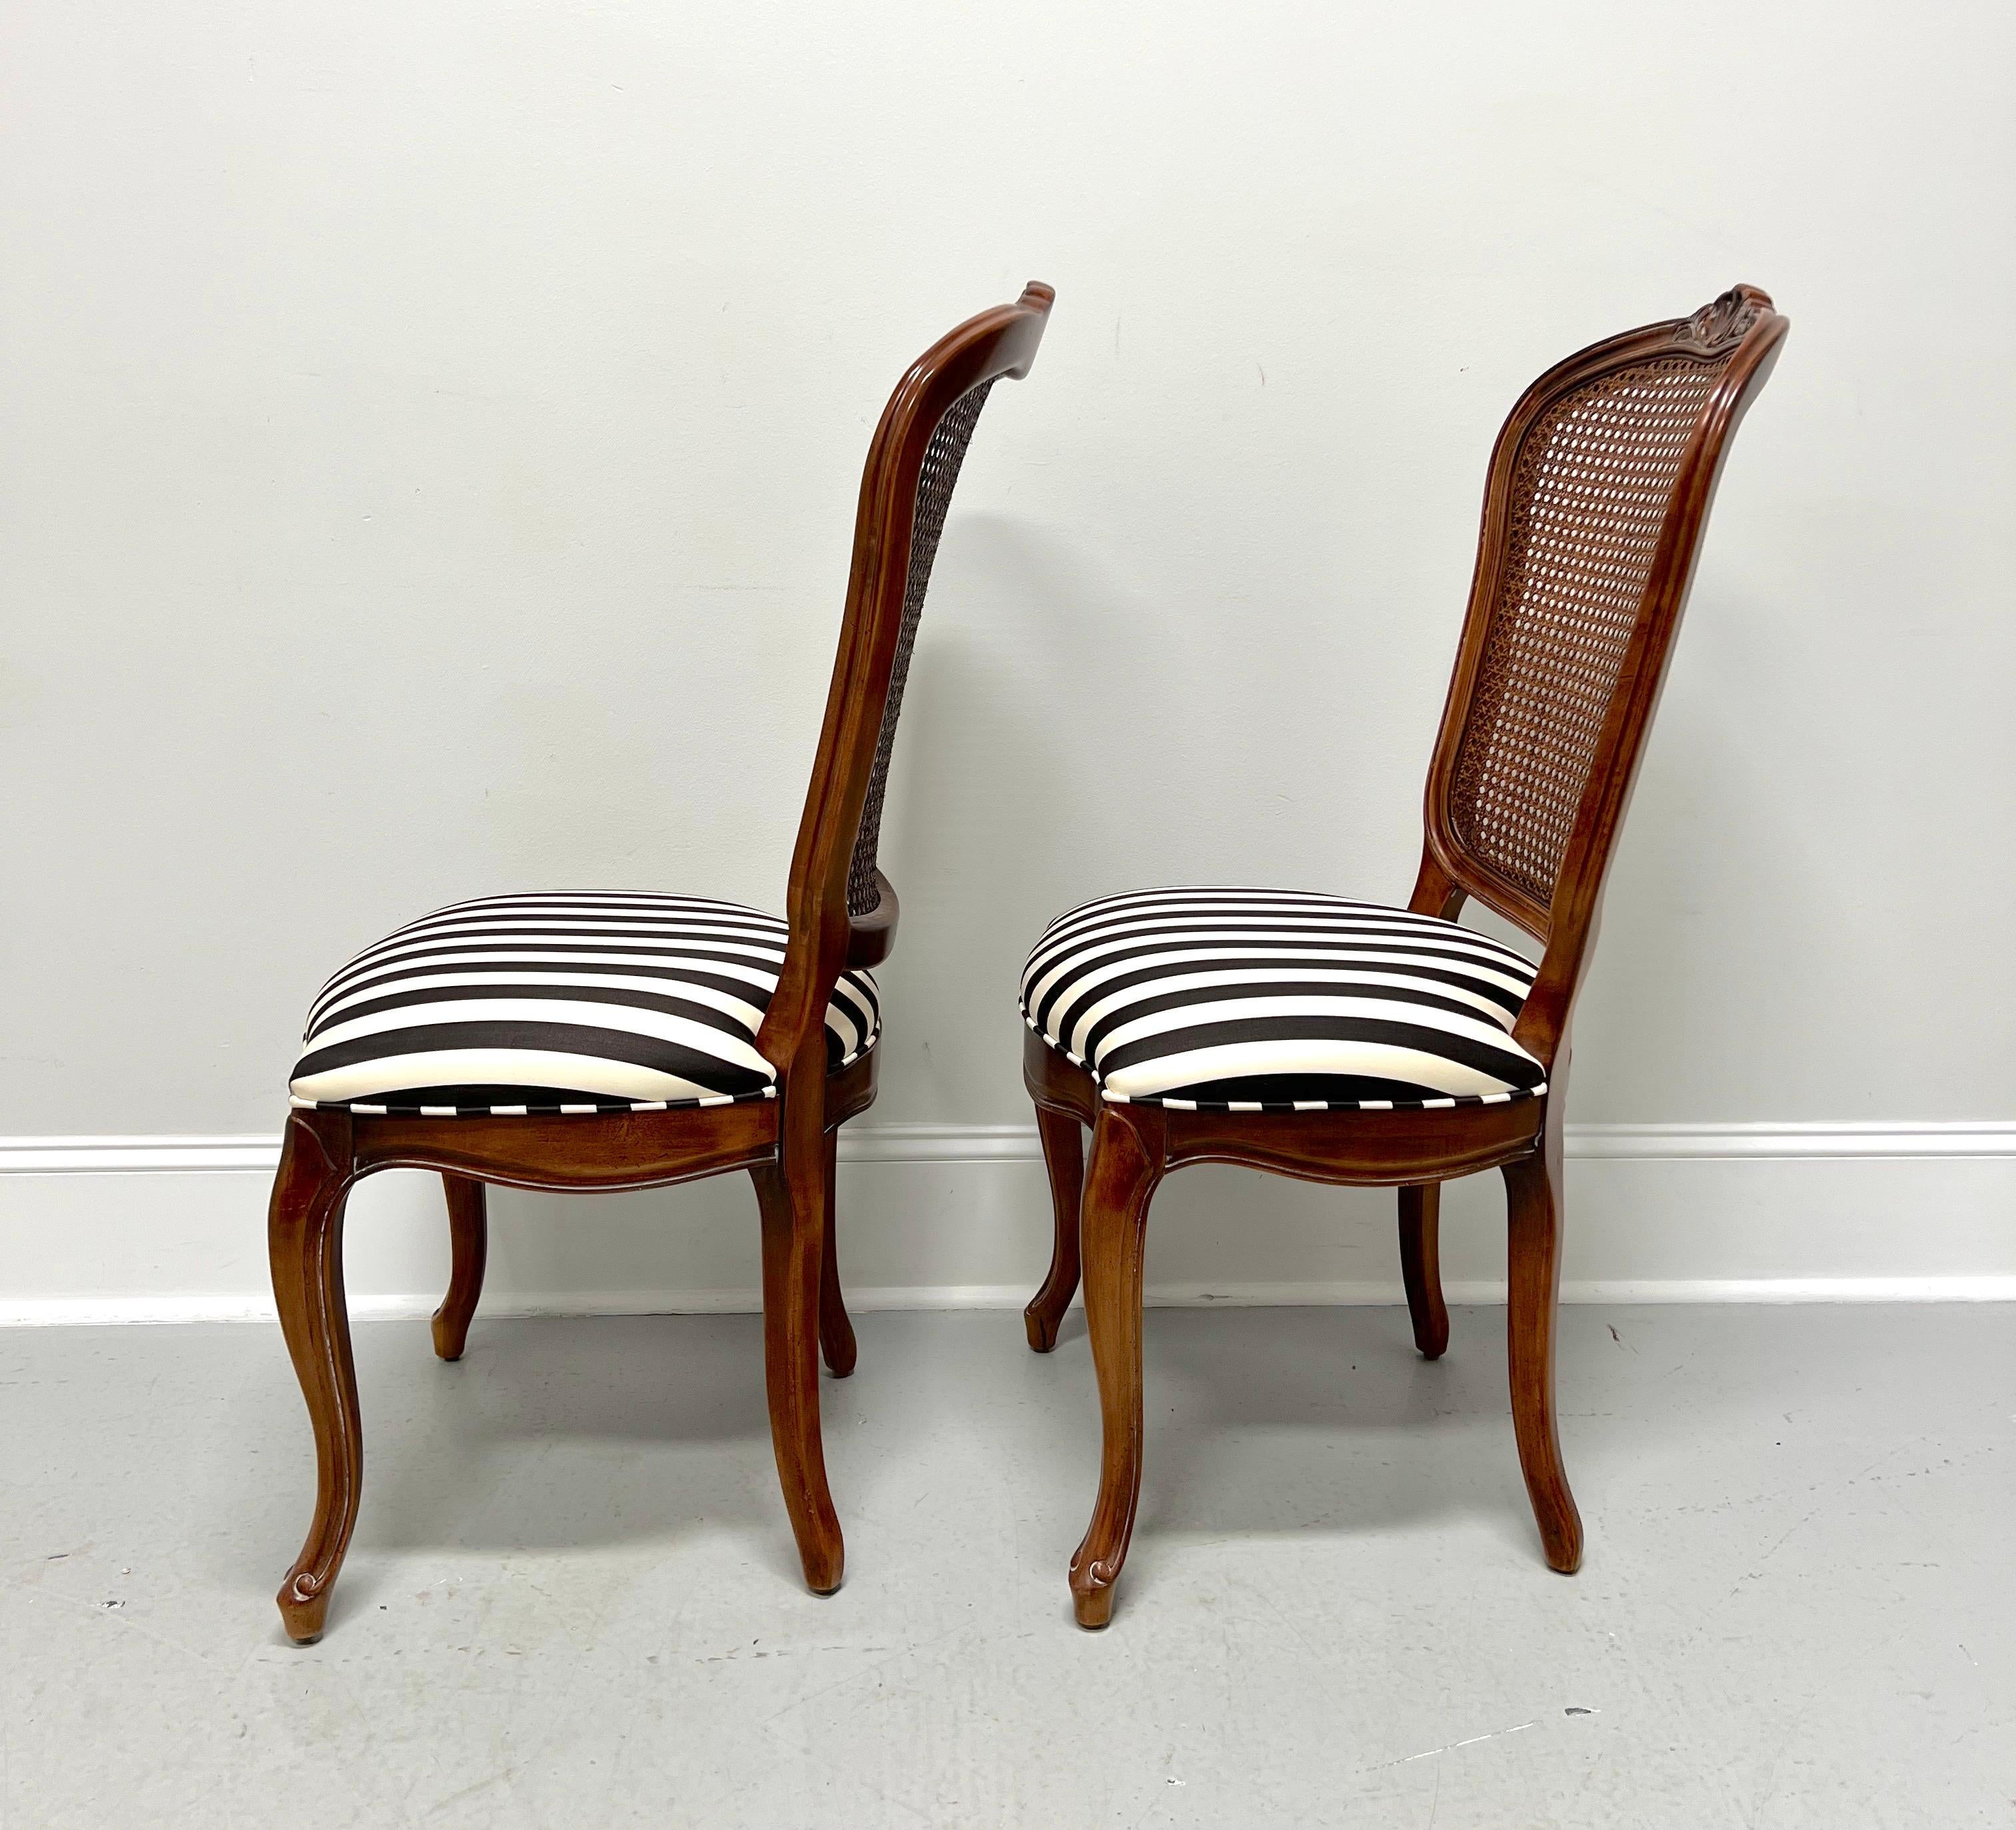 CENTURY Chardeau Collection Cherry Caned French Dining Side Chairs - Pair A Bon état - En vente à Charlotte, NC